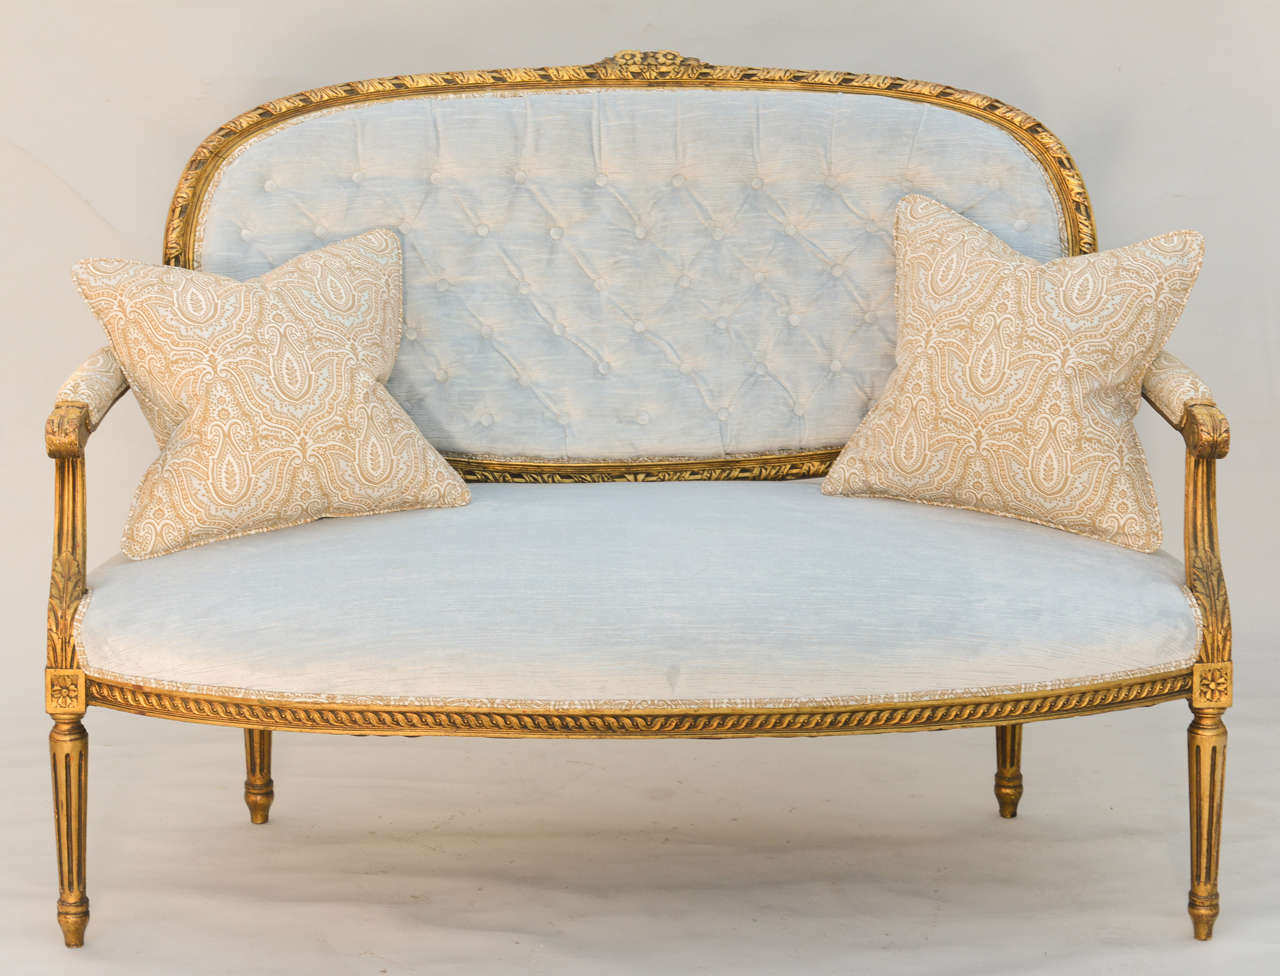 Louis XVI giltwood settee, having a tufted oval back in gadrooned frame surmounted by carved flowers, padded armrests on channeled uprights, stuffover seat on bowed rail with complimentary carving, raised on round fluted tapering legs, ending in